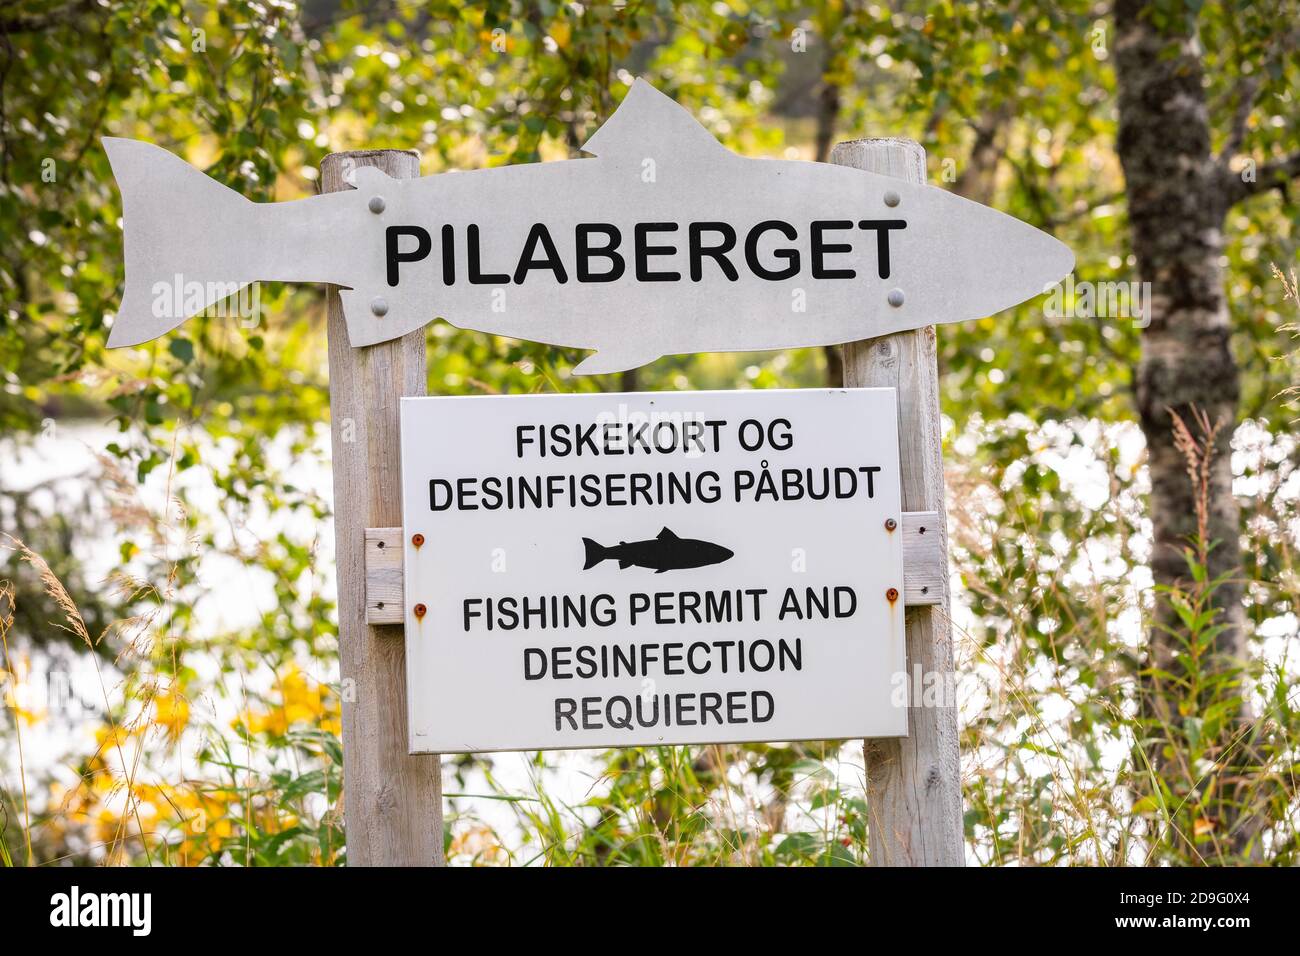 Info board about fishing permit and desinfection required on Ranaleva river, Norway Stock Photo